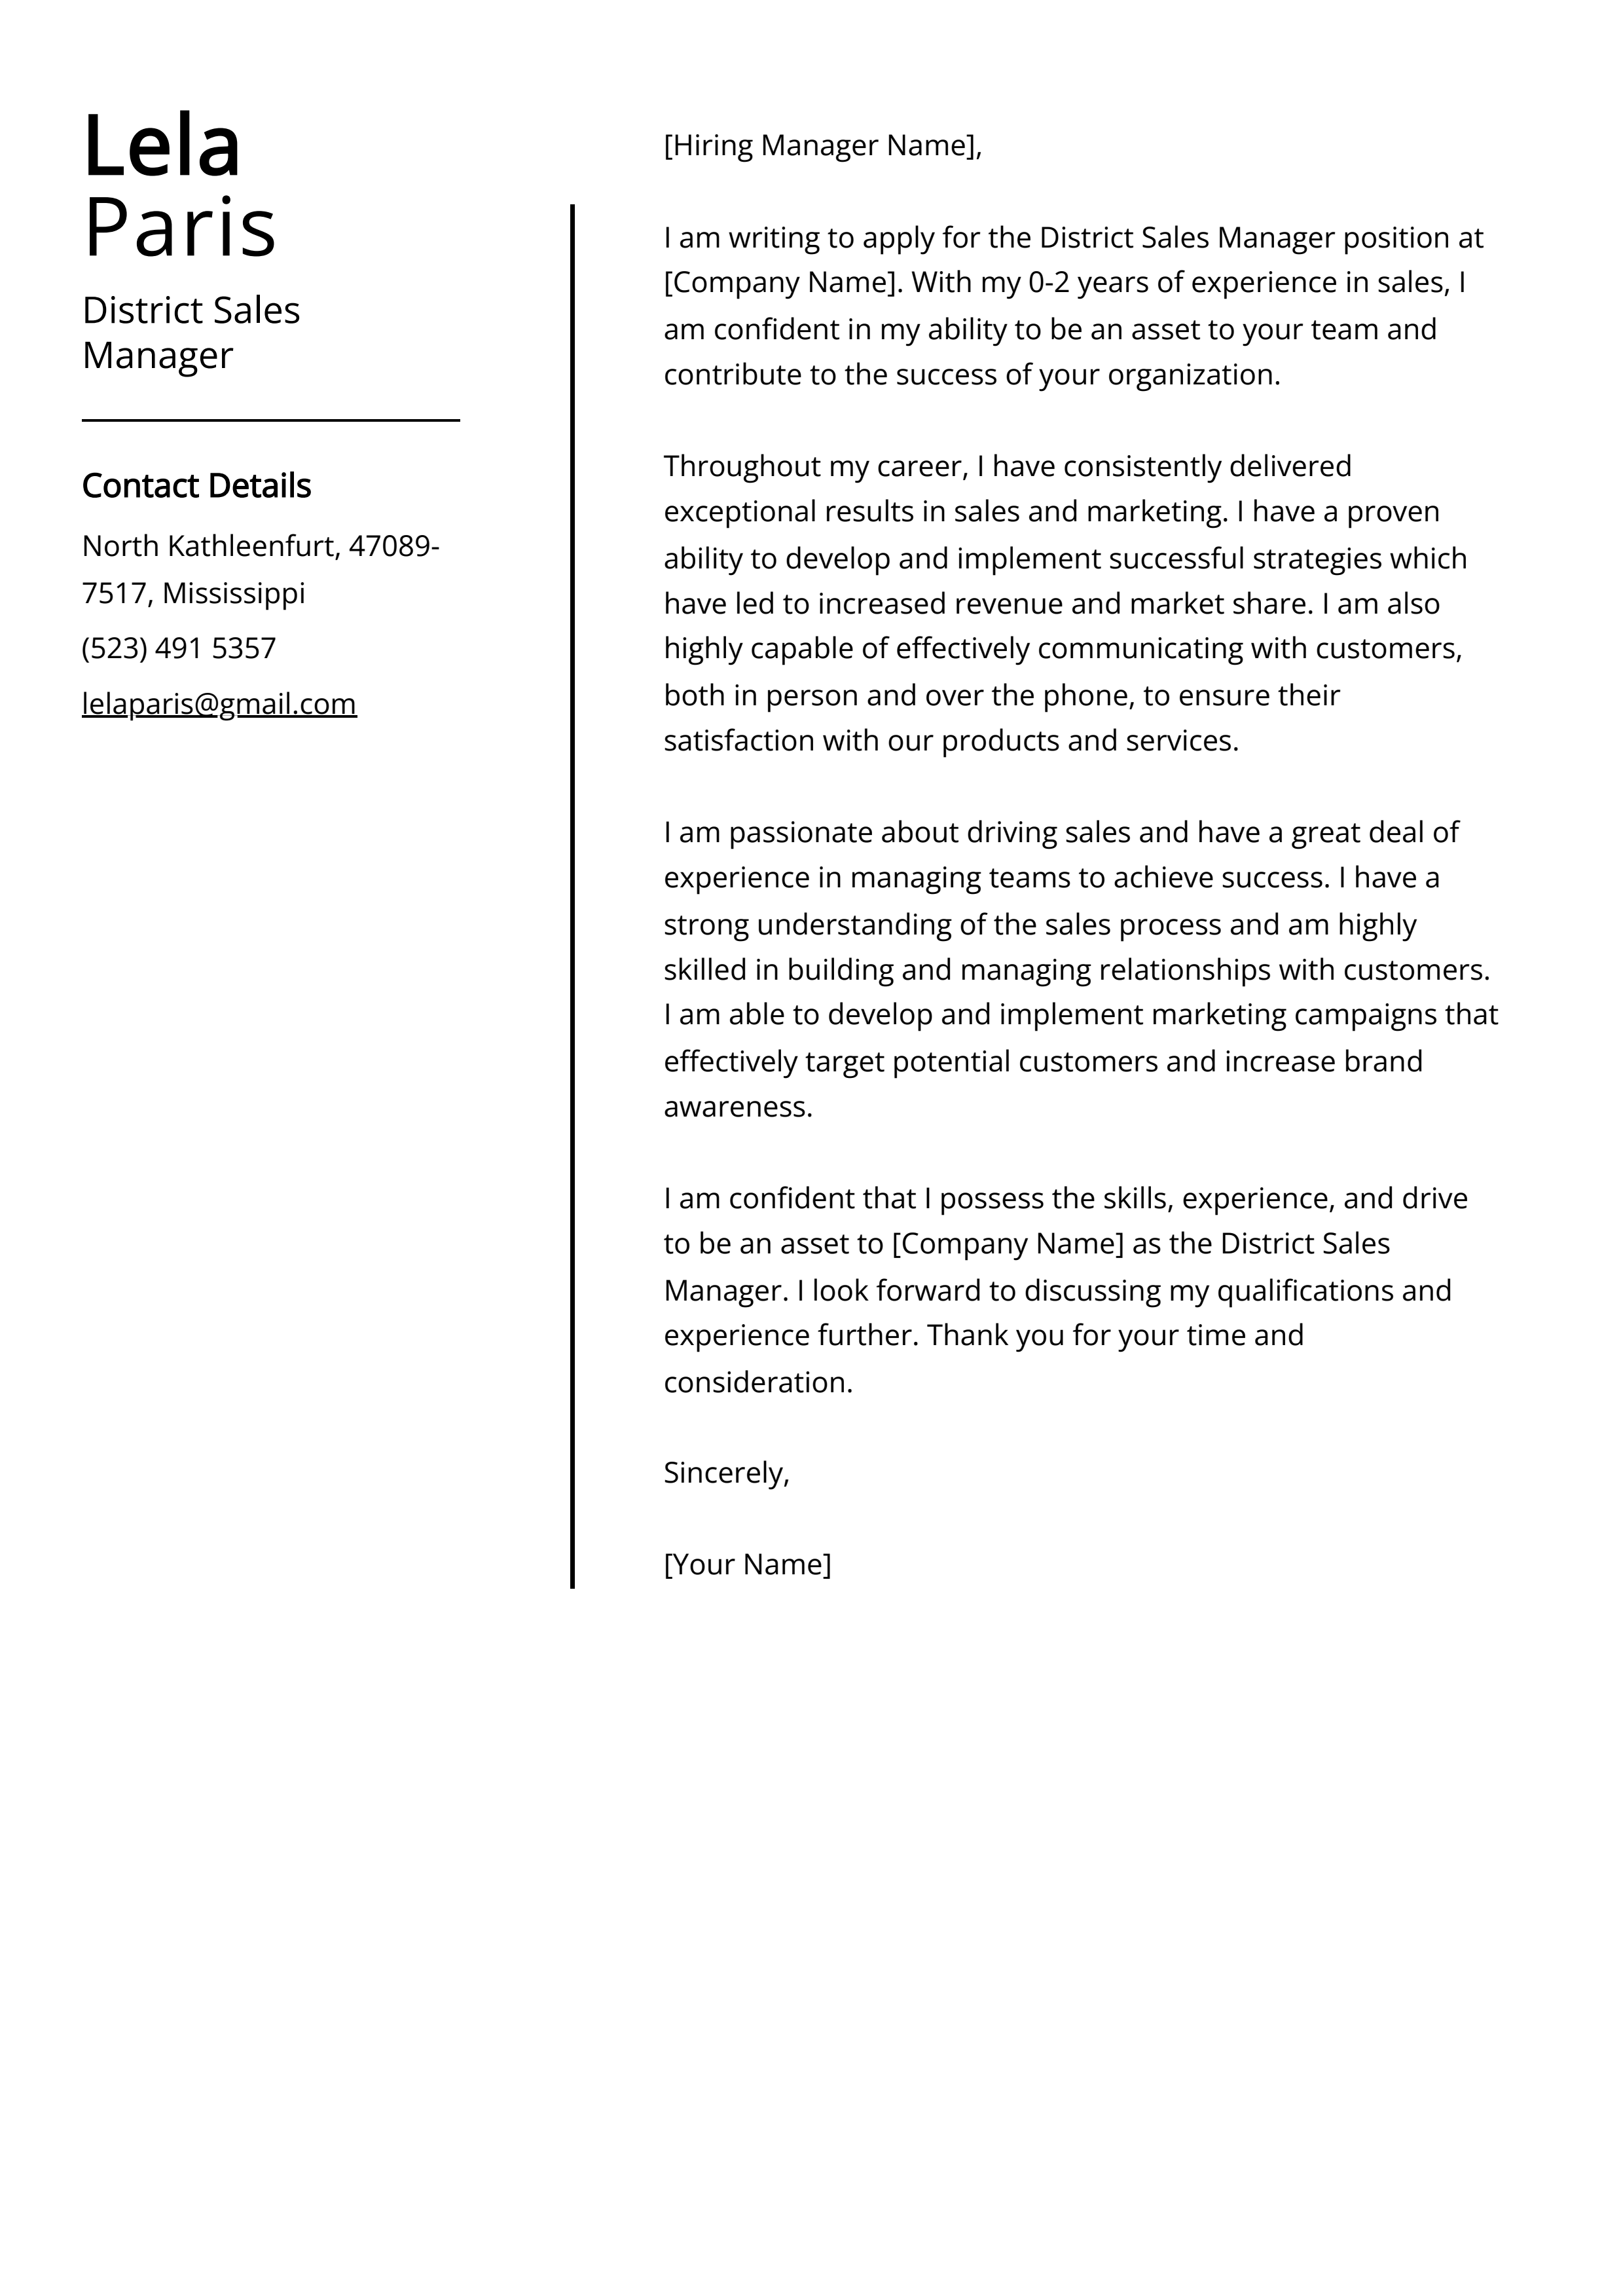 District Sales Manager Cover Letter Example